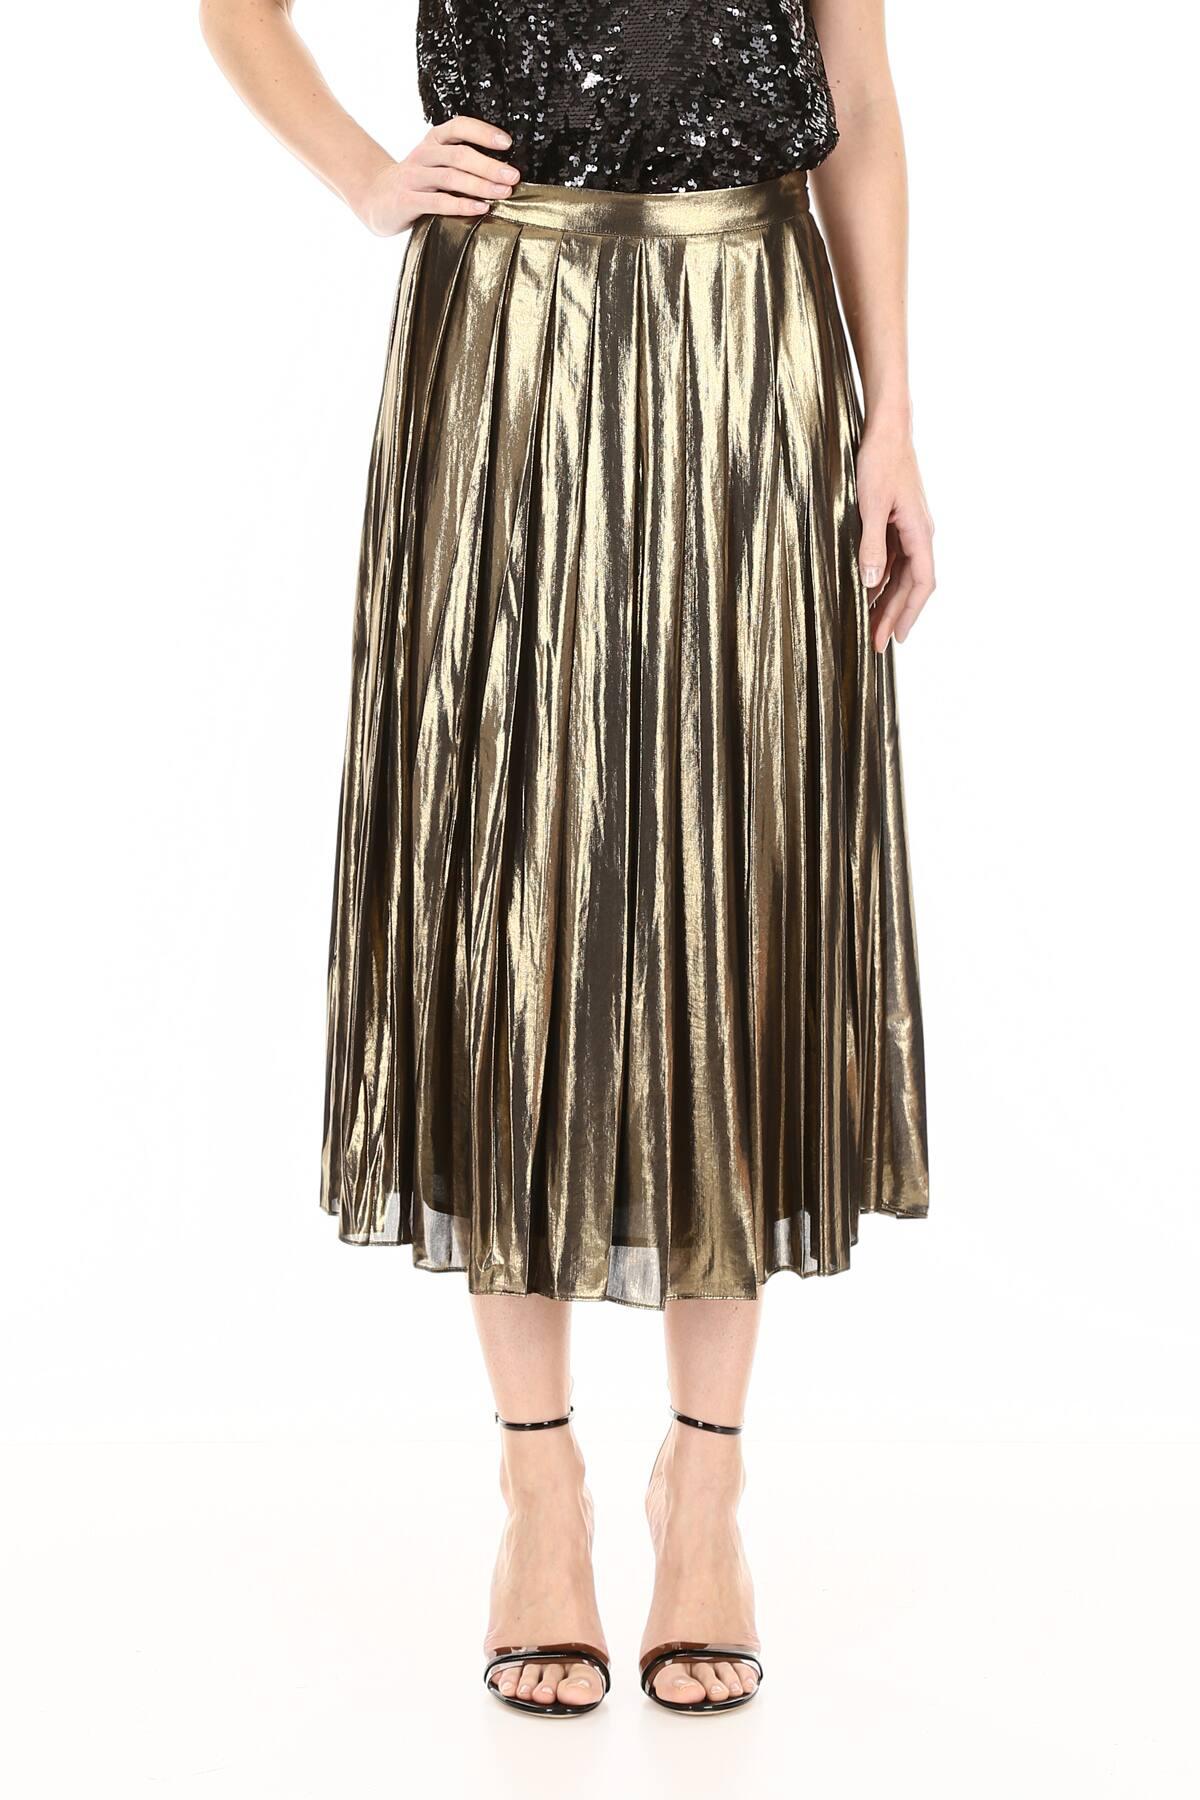 MICHAEL Michael Kors Synthetic Pleated Skirt in Gold (Metallic) - Lyst